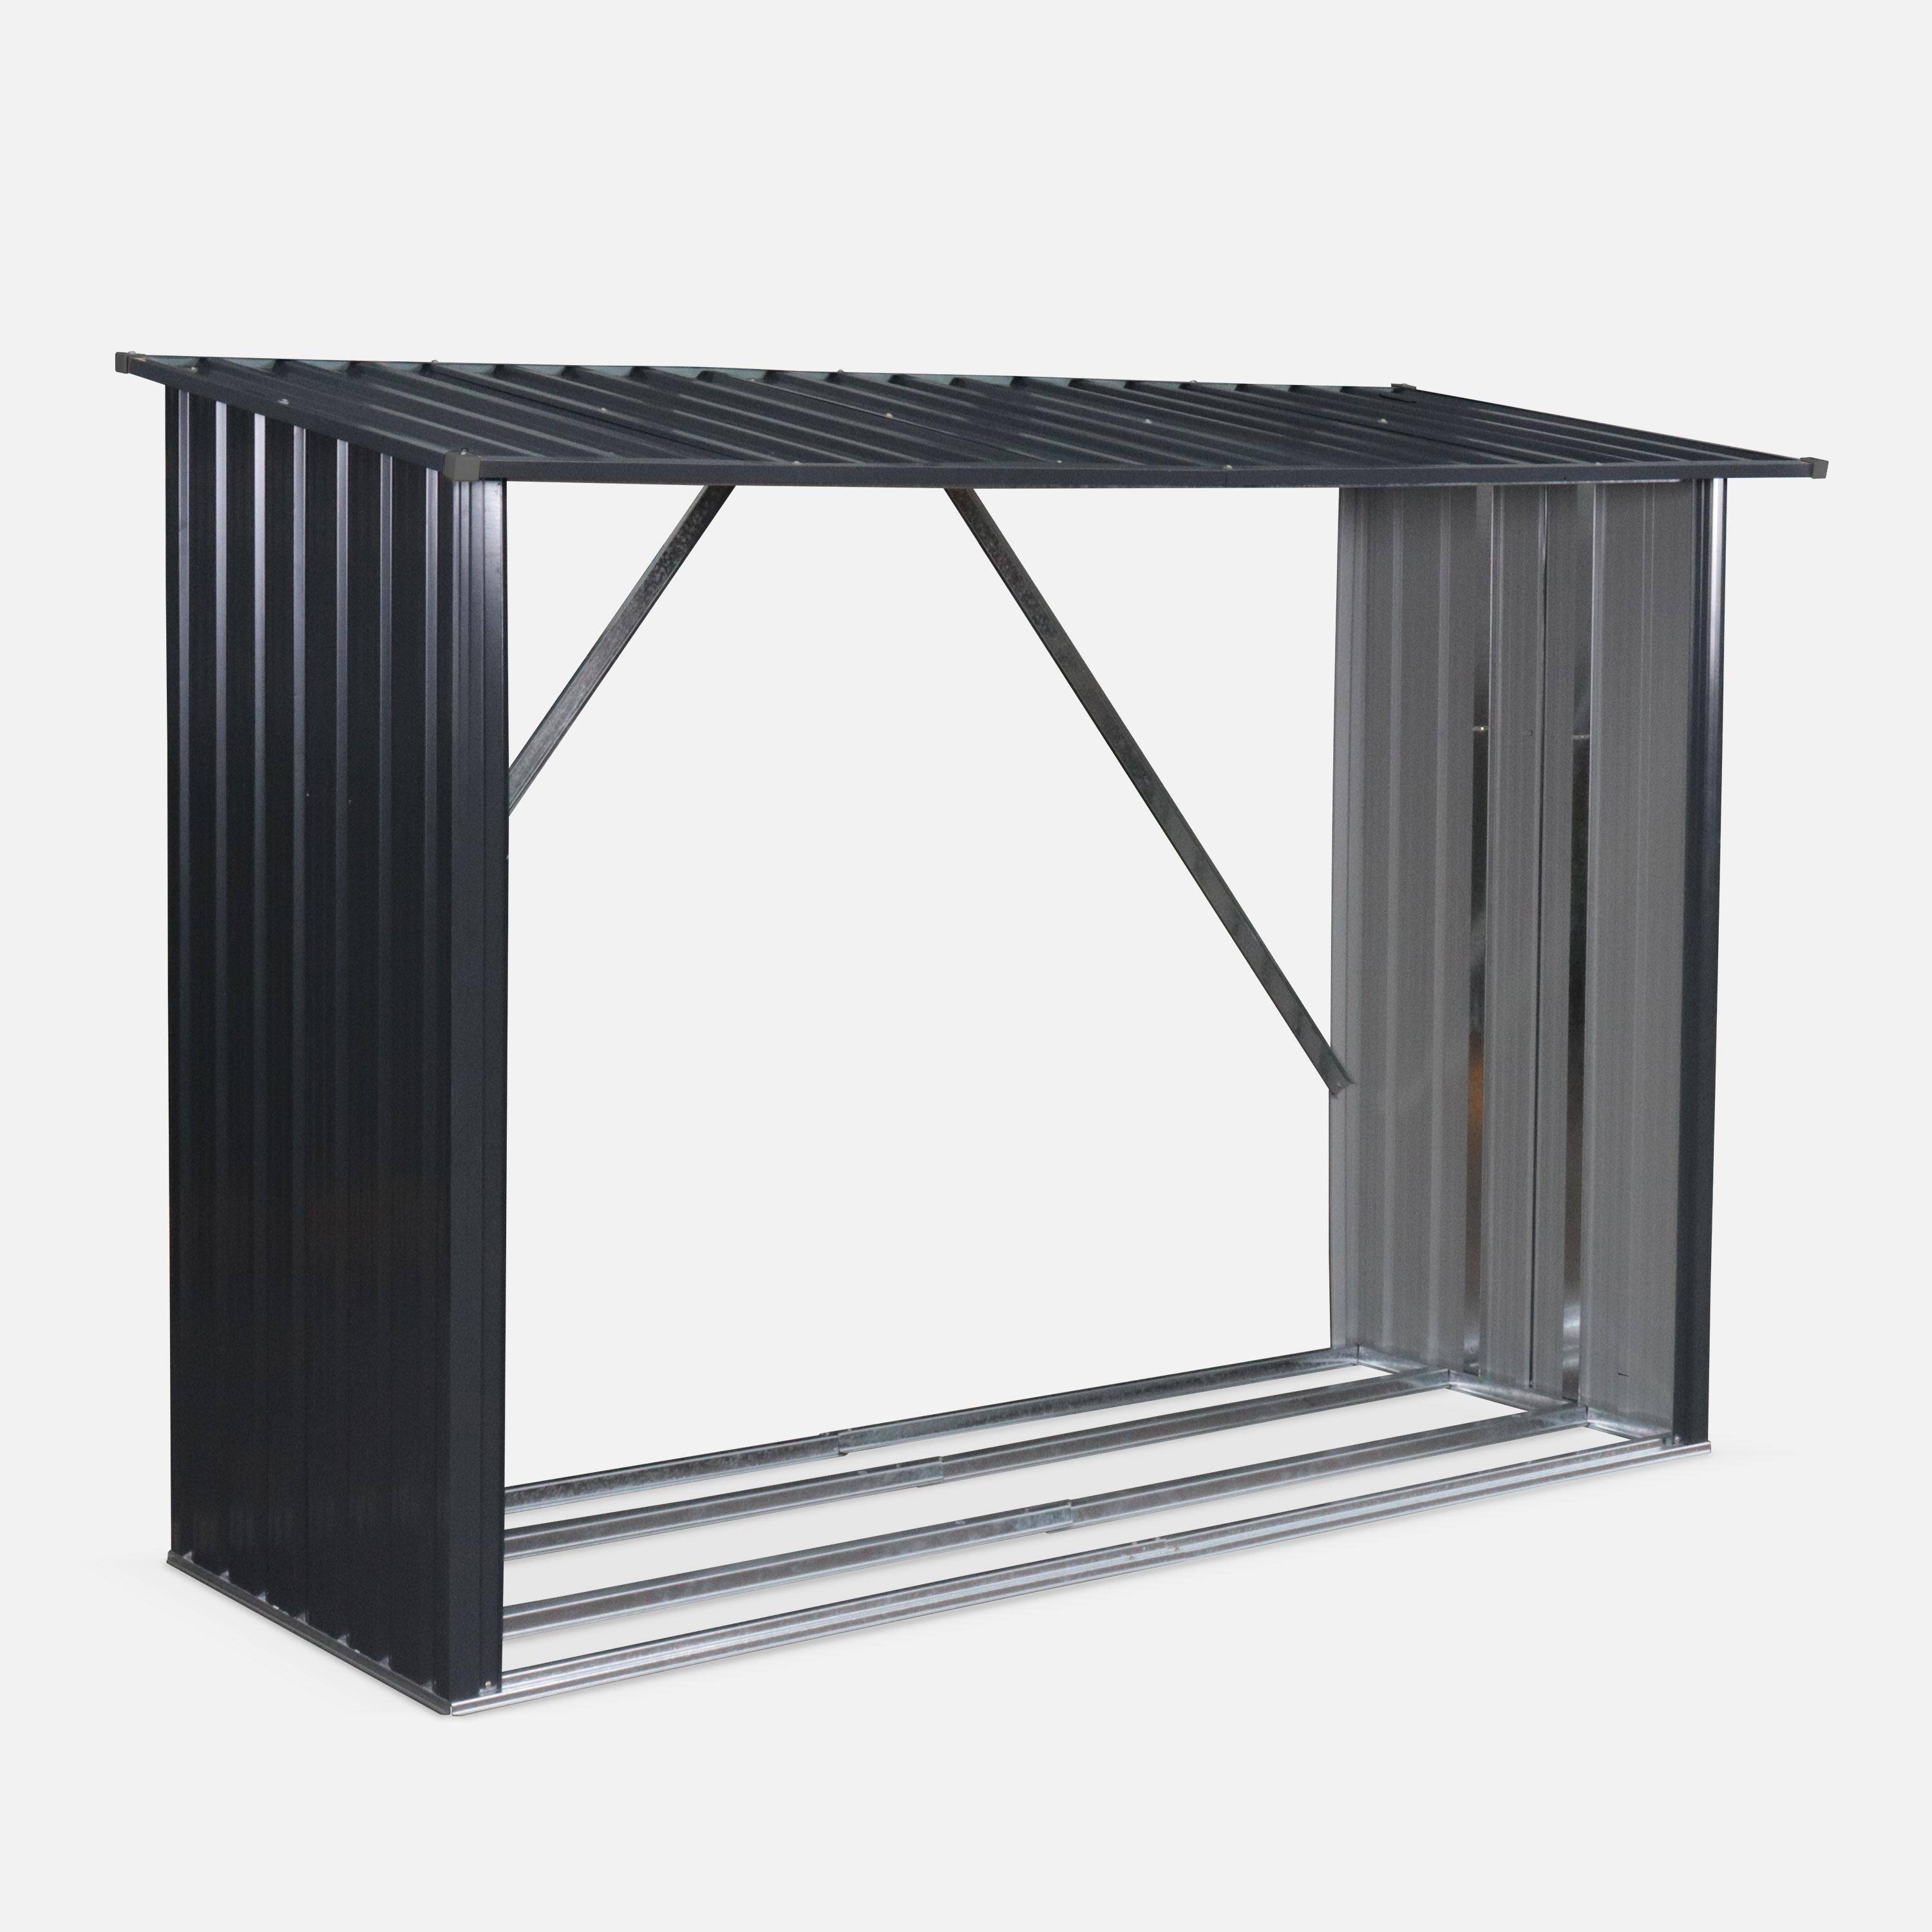 Metal woodshed 80 x 215 x 155 cm, anthracite grey - Epicea -  galvanised steel, 2 steres Photo1